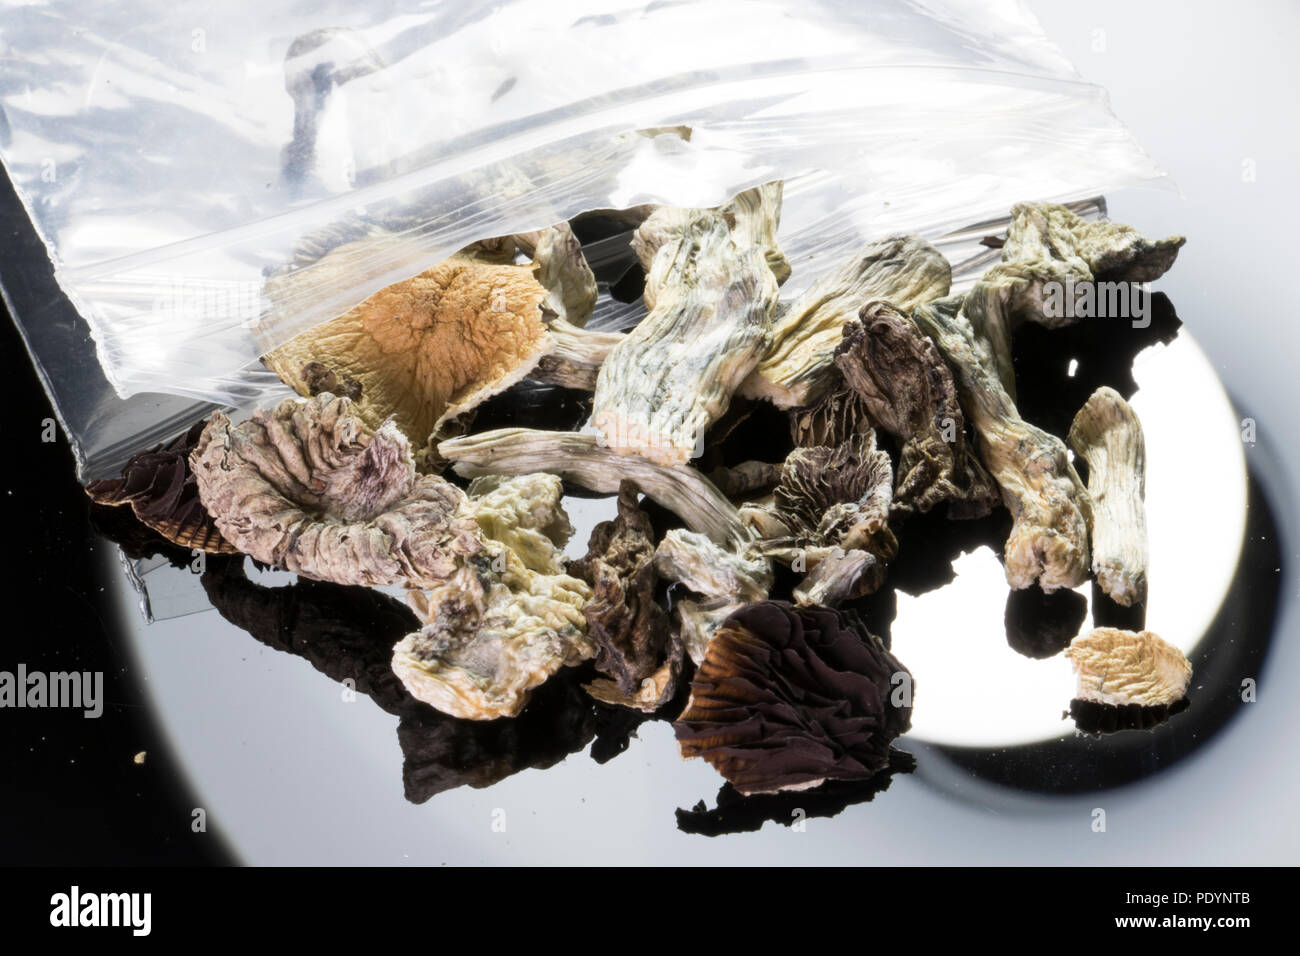 Psychedelic Mushrooms. Dried magic mushrooms spilling out of a bag. Stock Photo